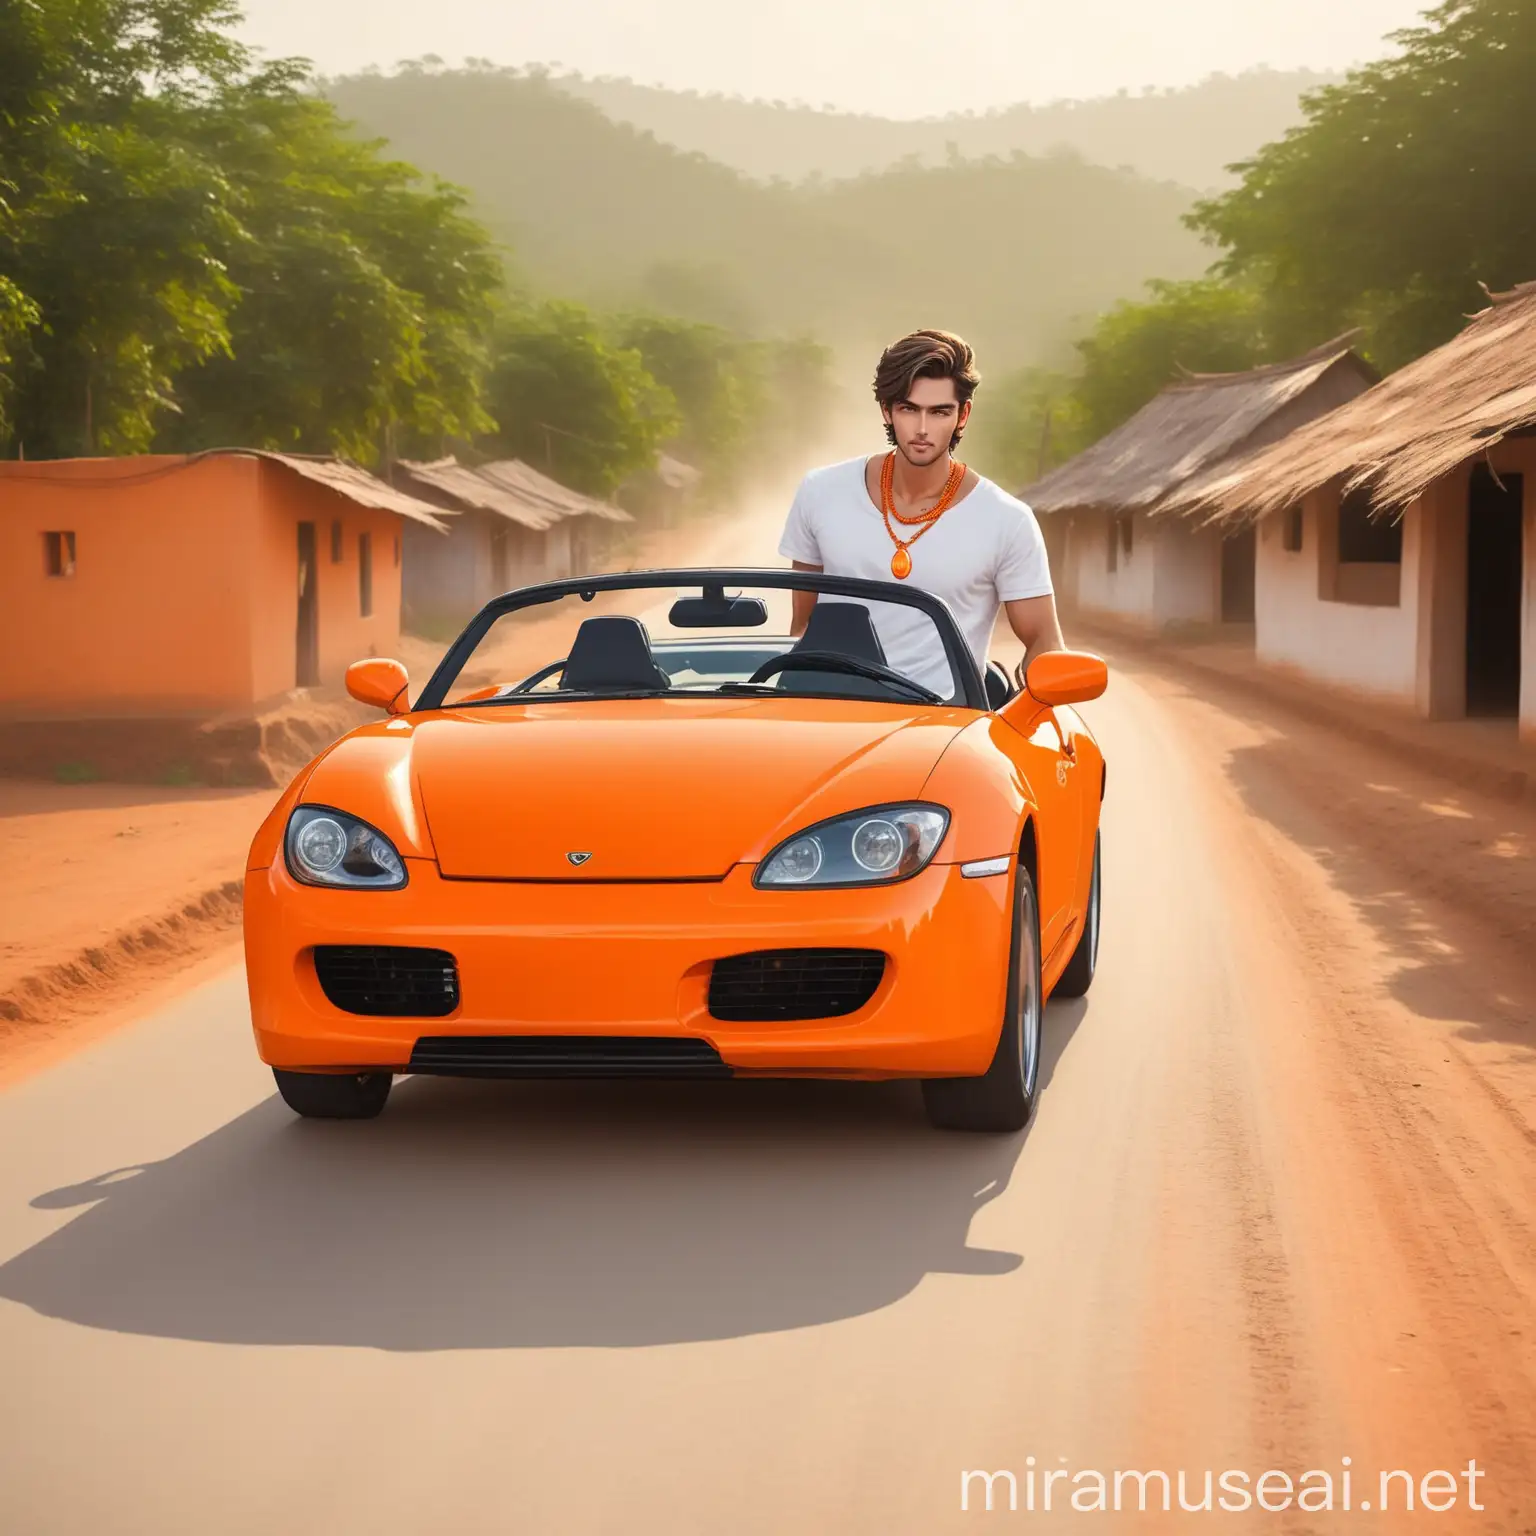 Young Western Man with Orange Potion Necklace Driving Sports Car on Indian Village Road